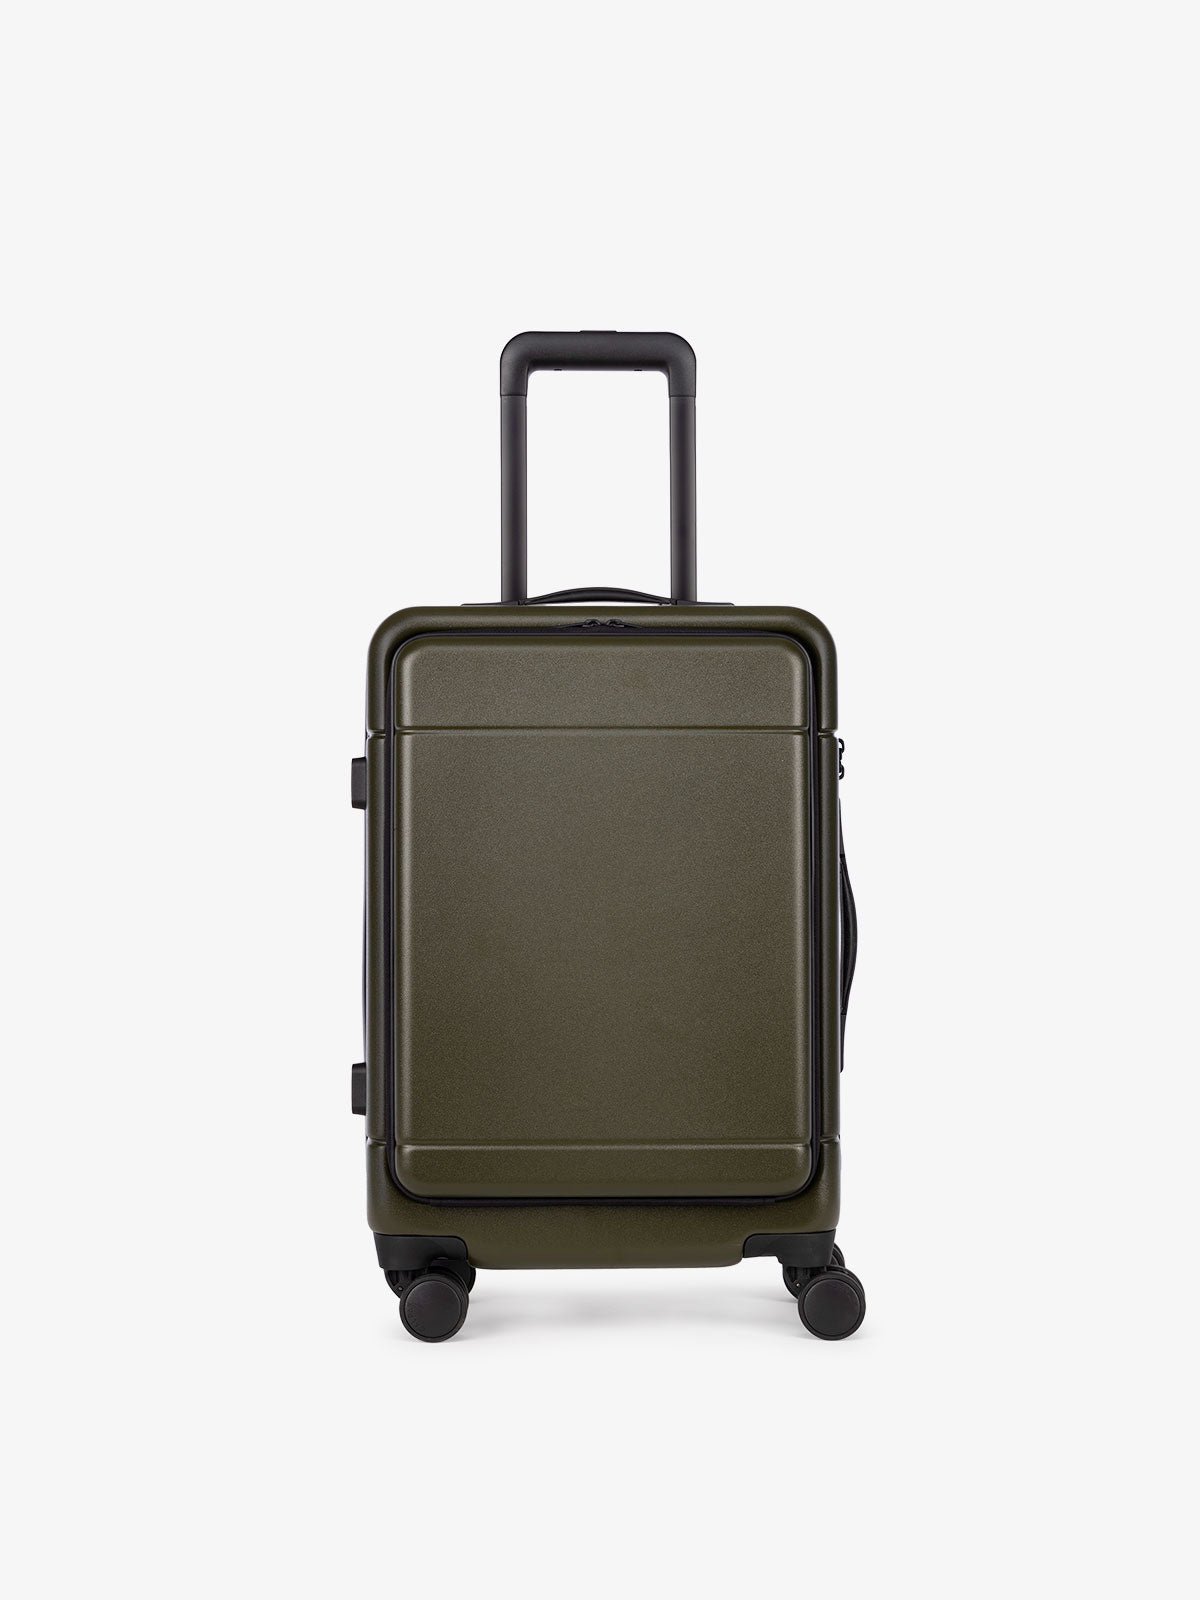 CALPAK Hue hardside carry-on spinner luggage with laptop compartment in green moss color